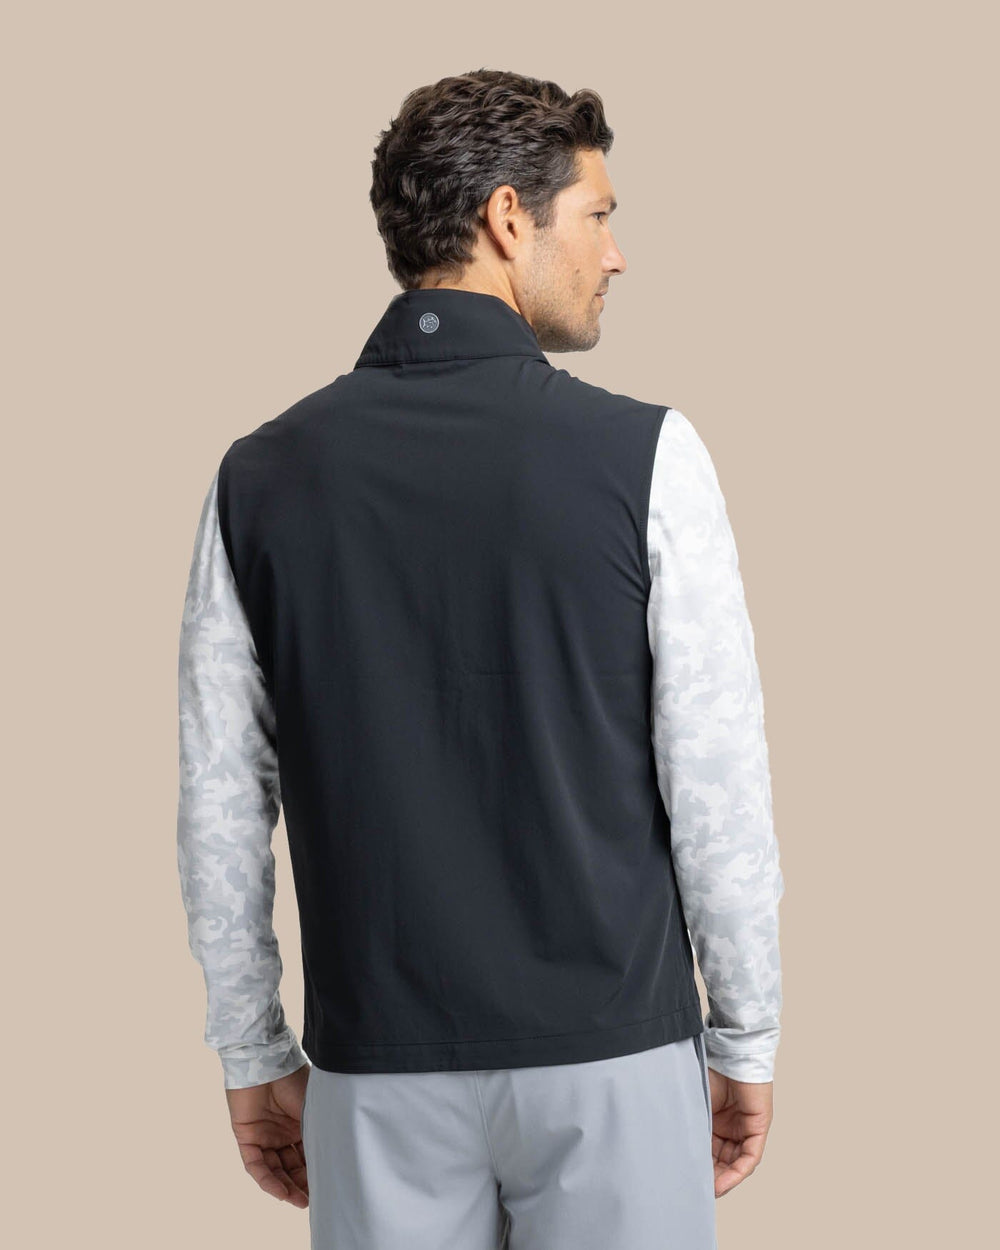 The back view of the Southern Tide Bowline Performance Vest by Southern Tide - Caviar Black